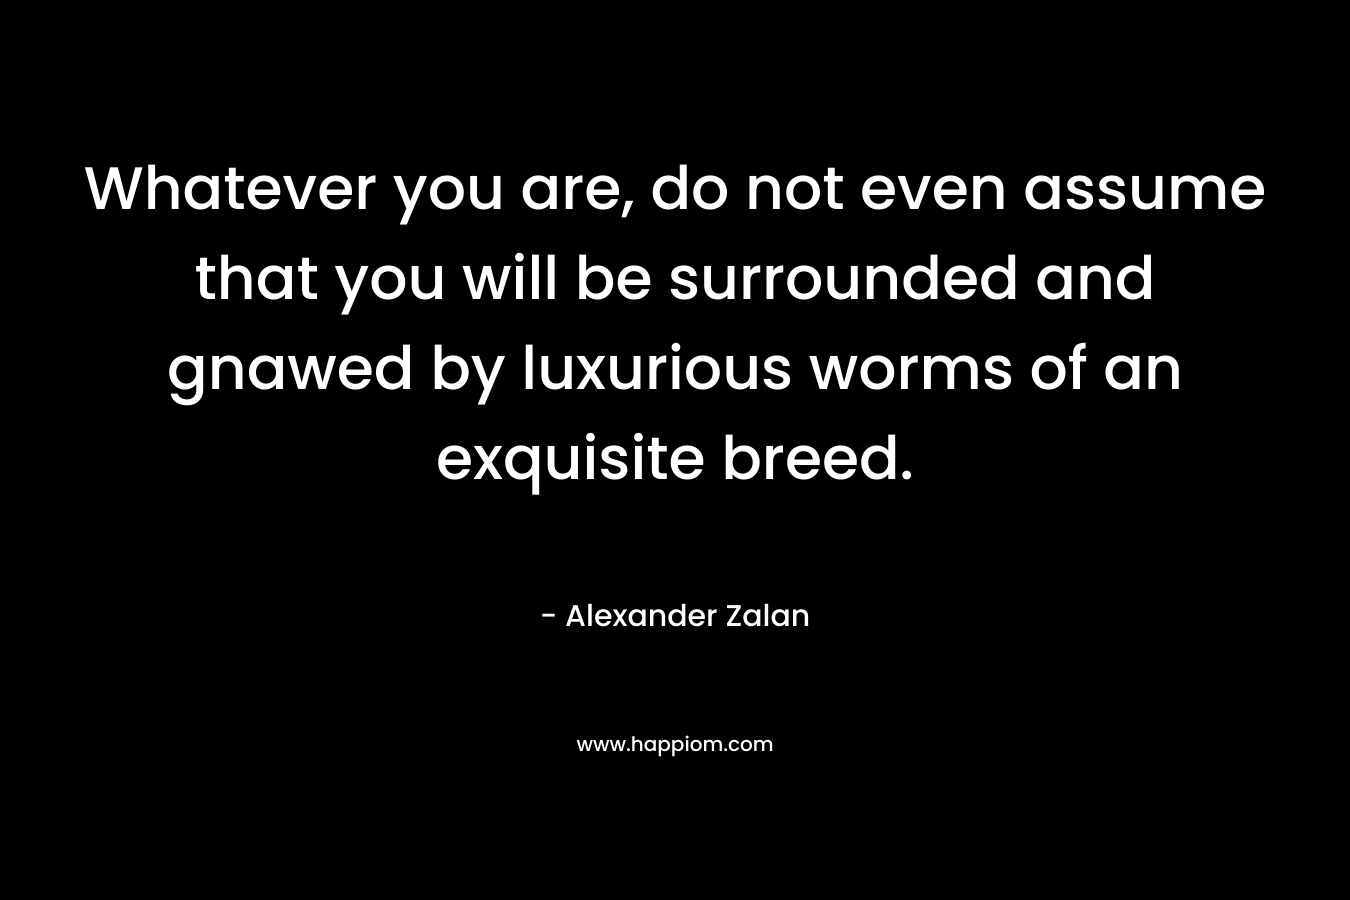 Whatever you are, do not even assume that you will be surrounded and gnawed by luxurious worms of an exquisite breed. – Alexander Zalan